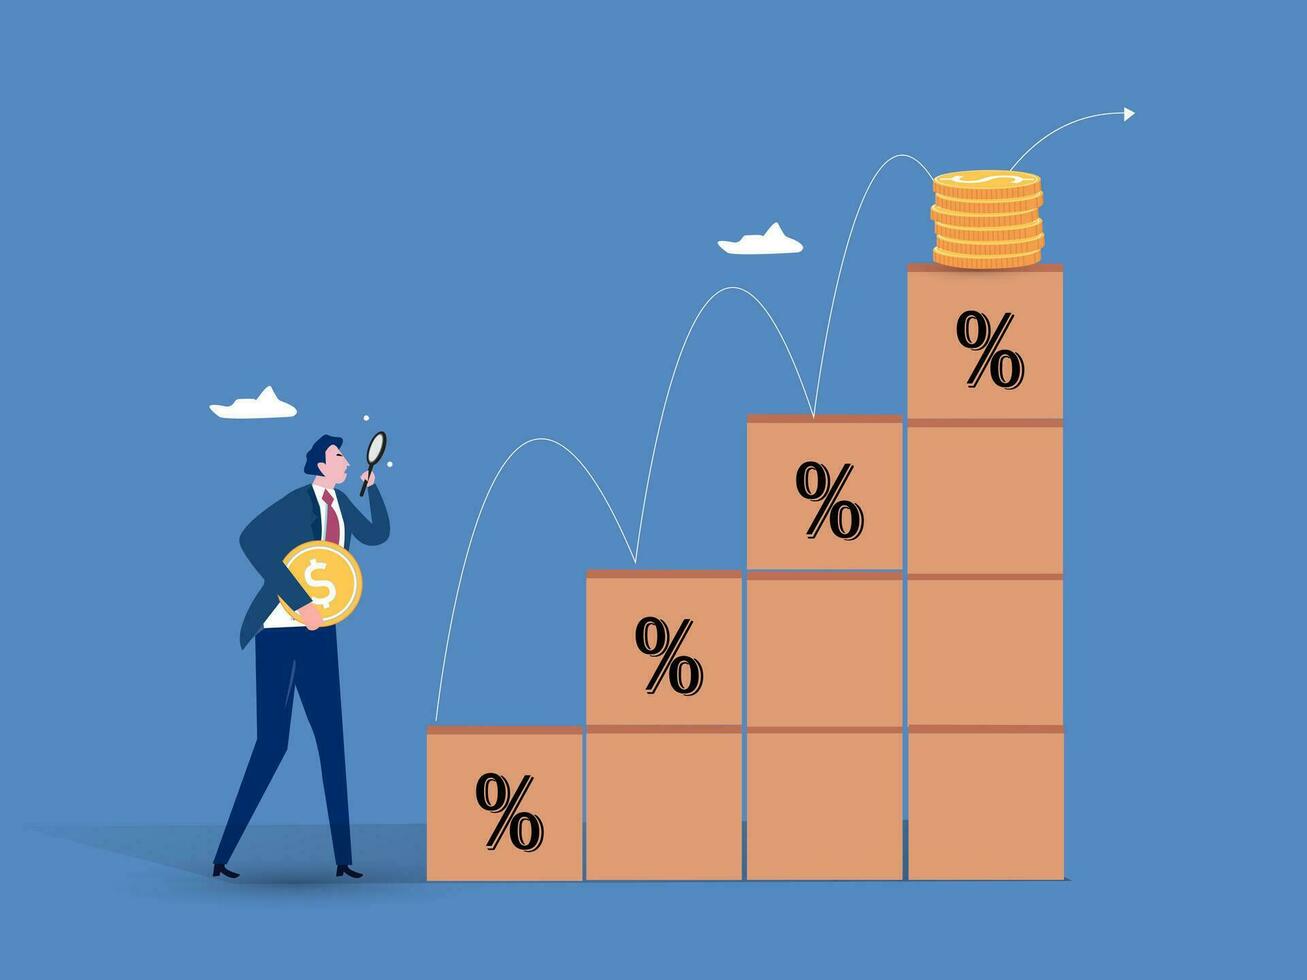 Investment and financial growth, interest growth on deposits and profit, economic improvement and GDP growth, wage growth and unemployment reduction, a man stands near a growing graph with a coin. vector